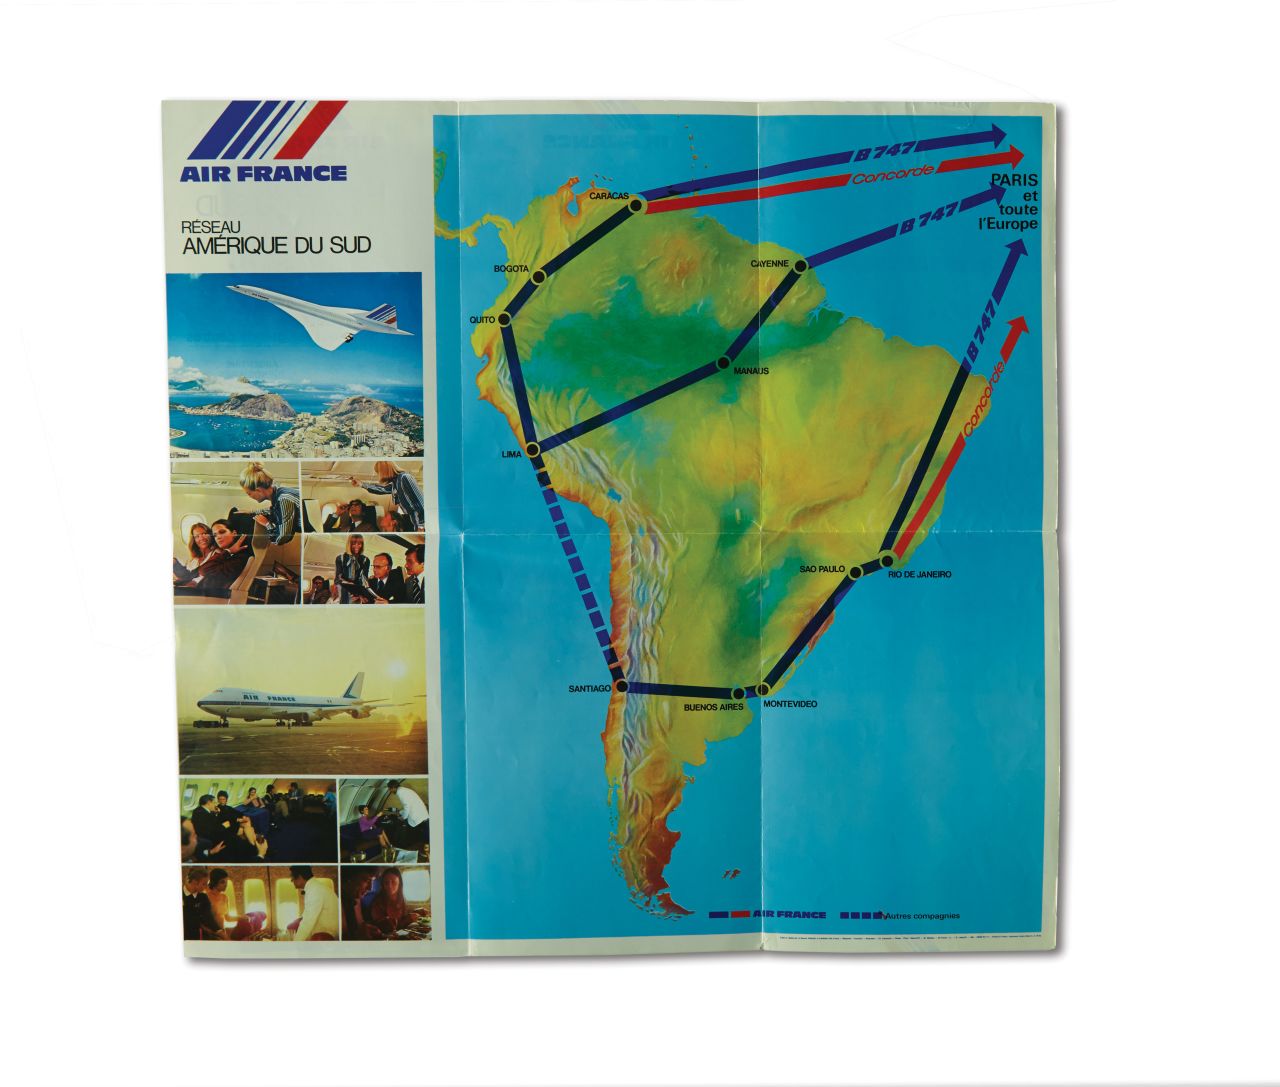 Air France Concorde South America brochure from 1976.